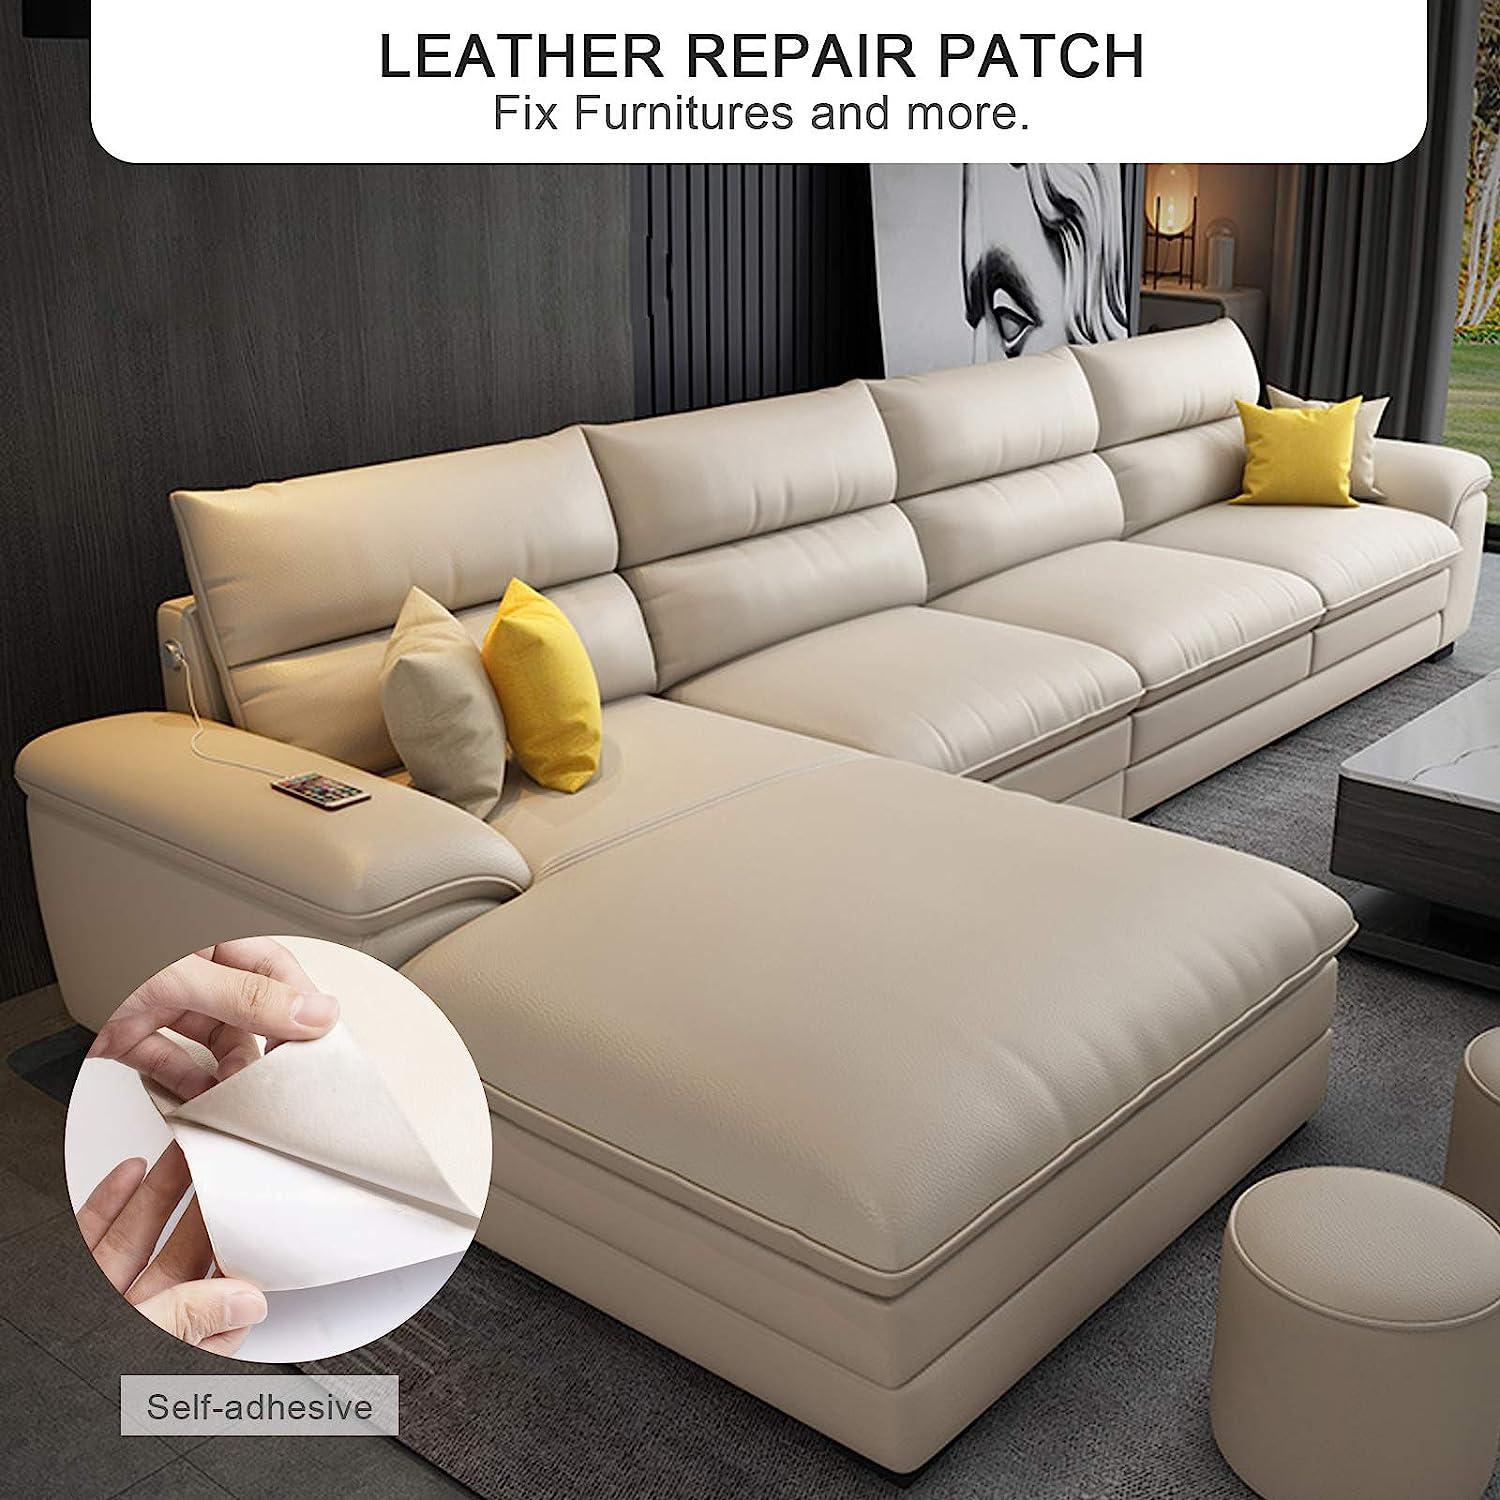 Leather Repair Patch Tape for Couches Self-Adhesive for Furniture